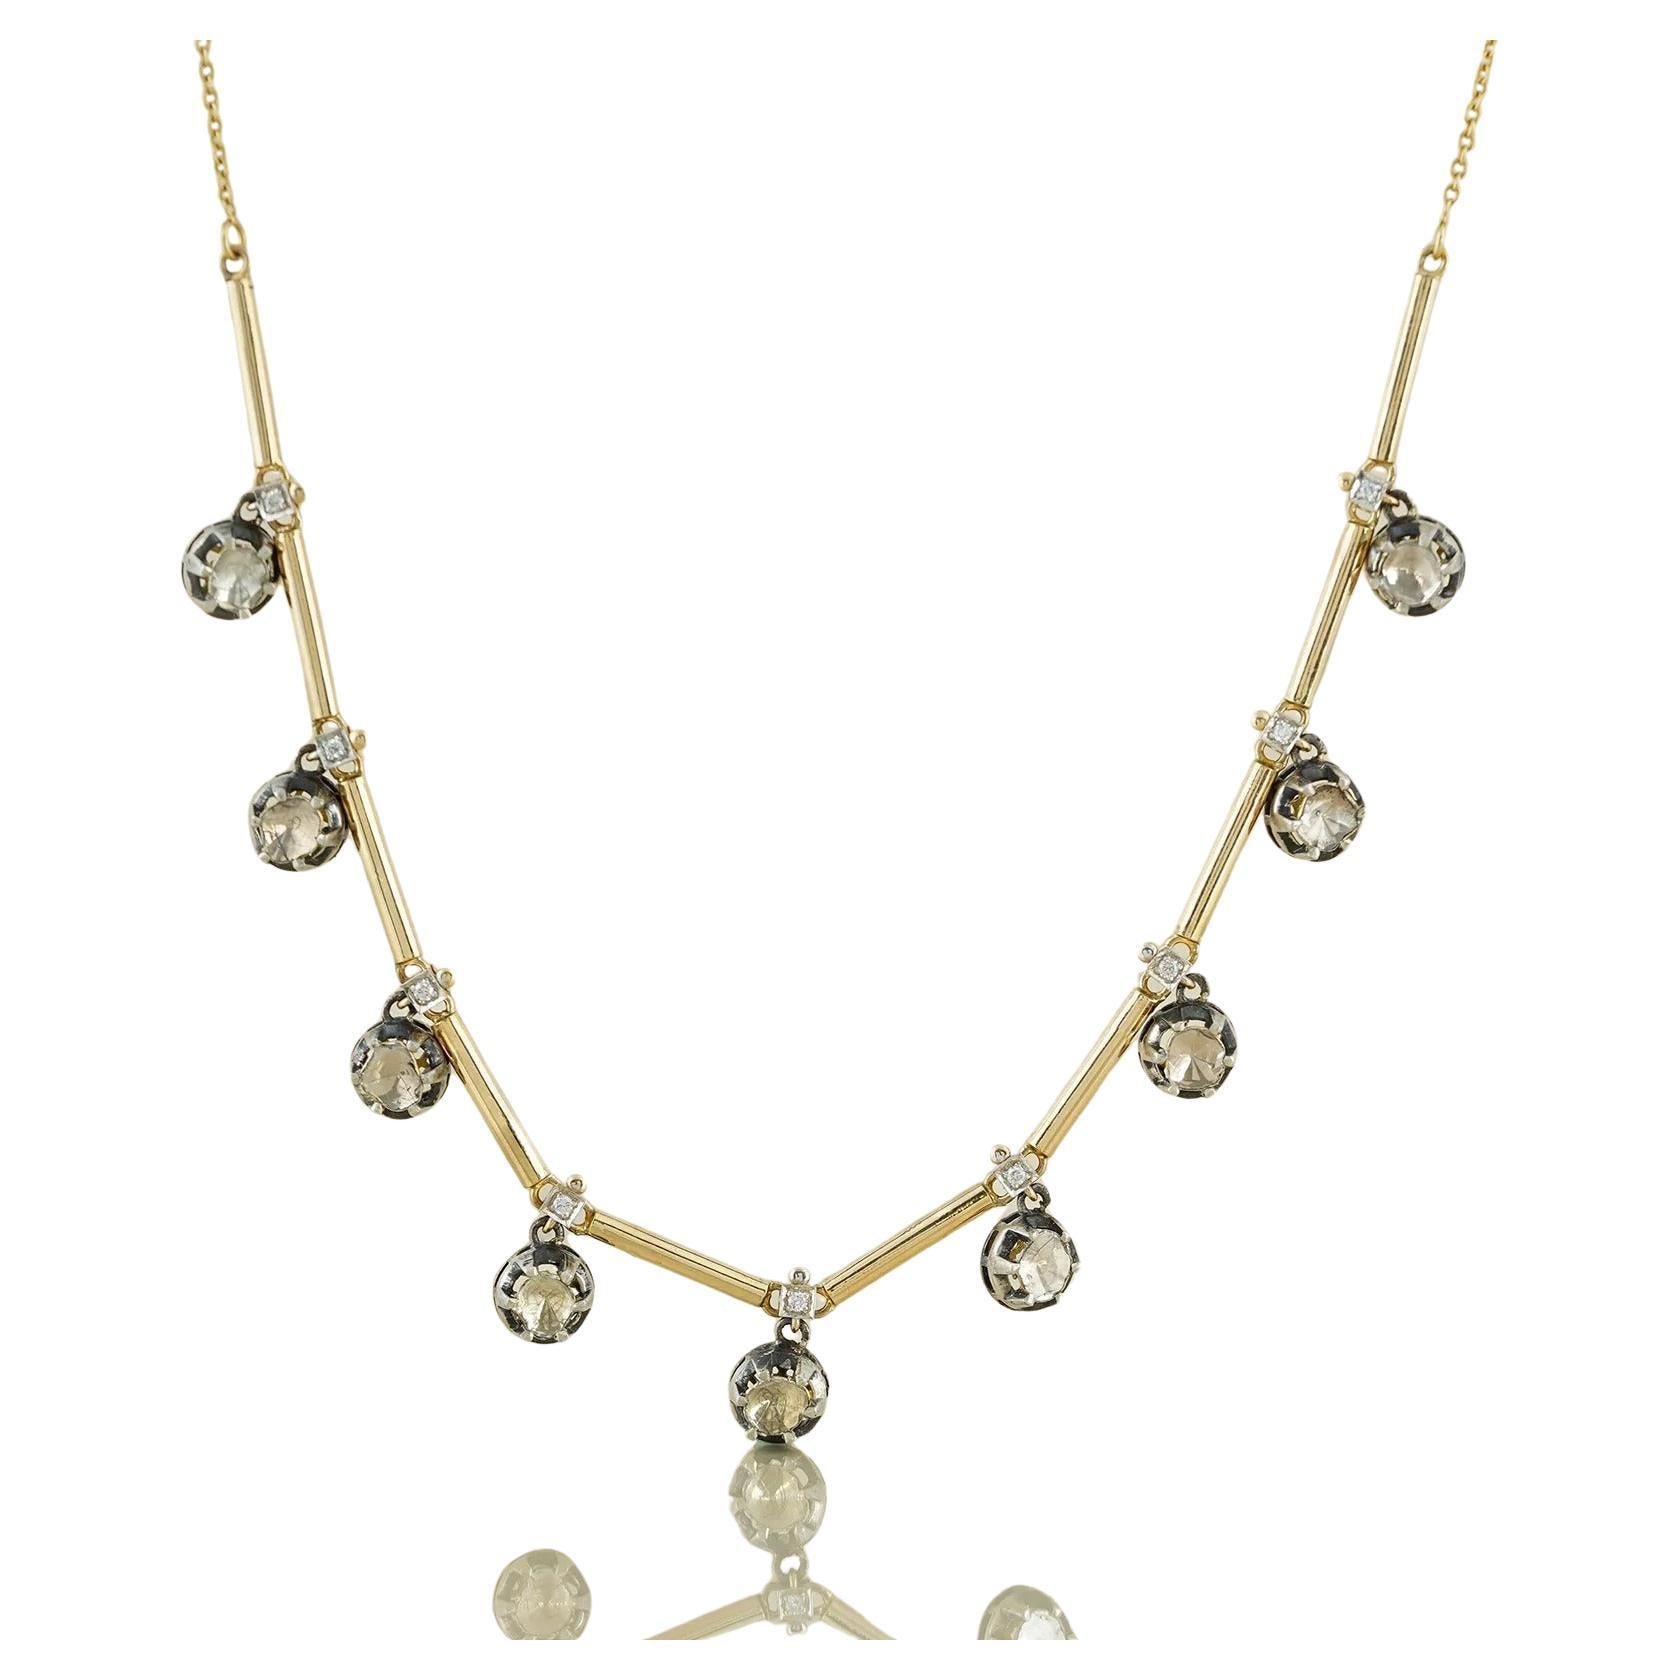 Lisa Gold and Uncut Diamond Necklace